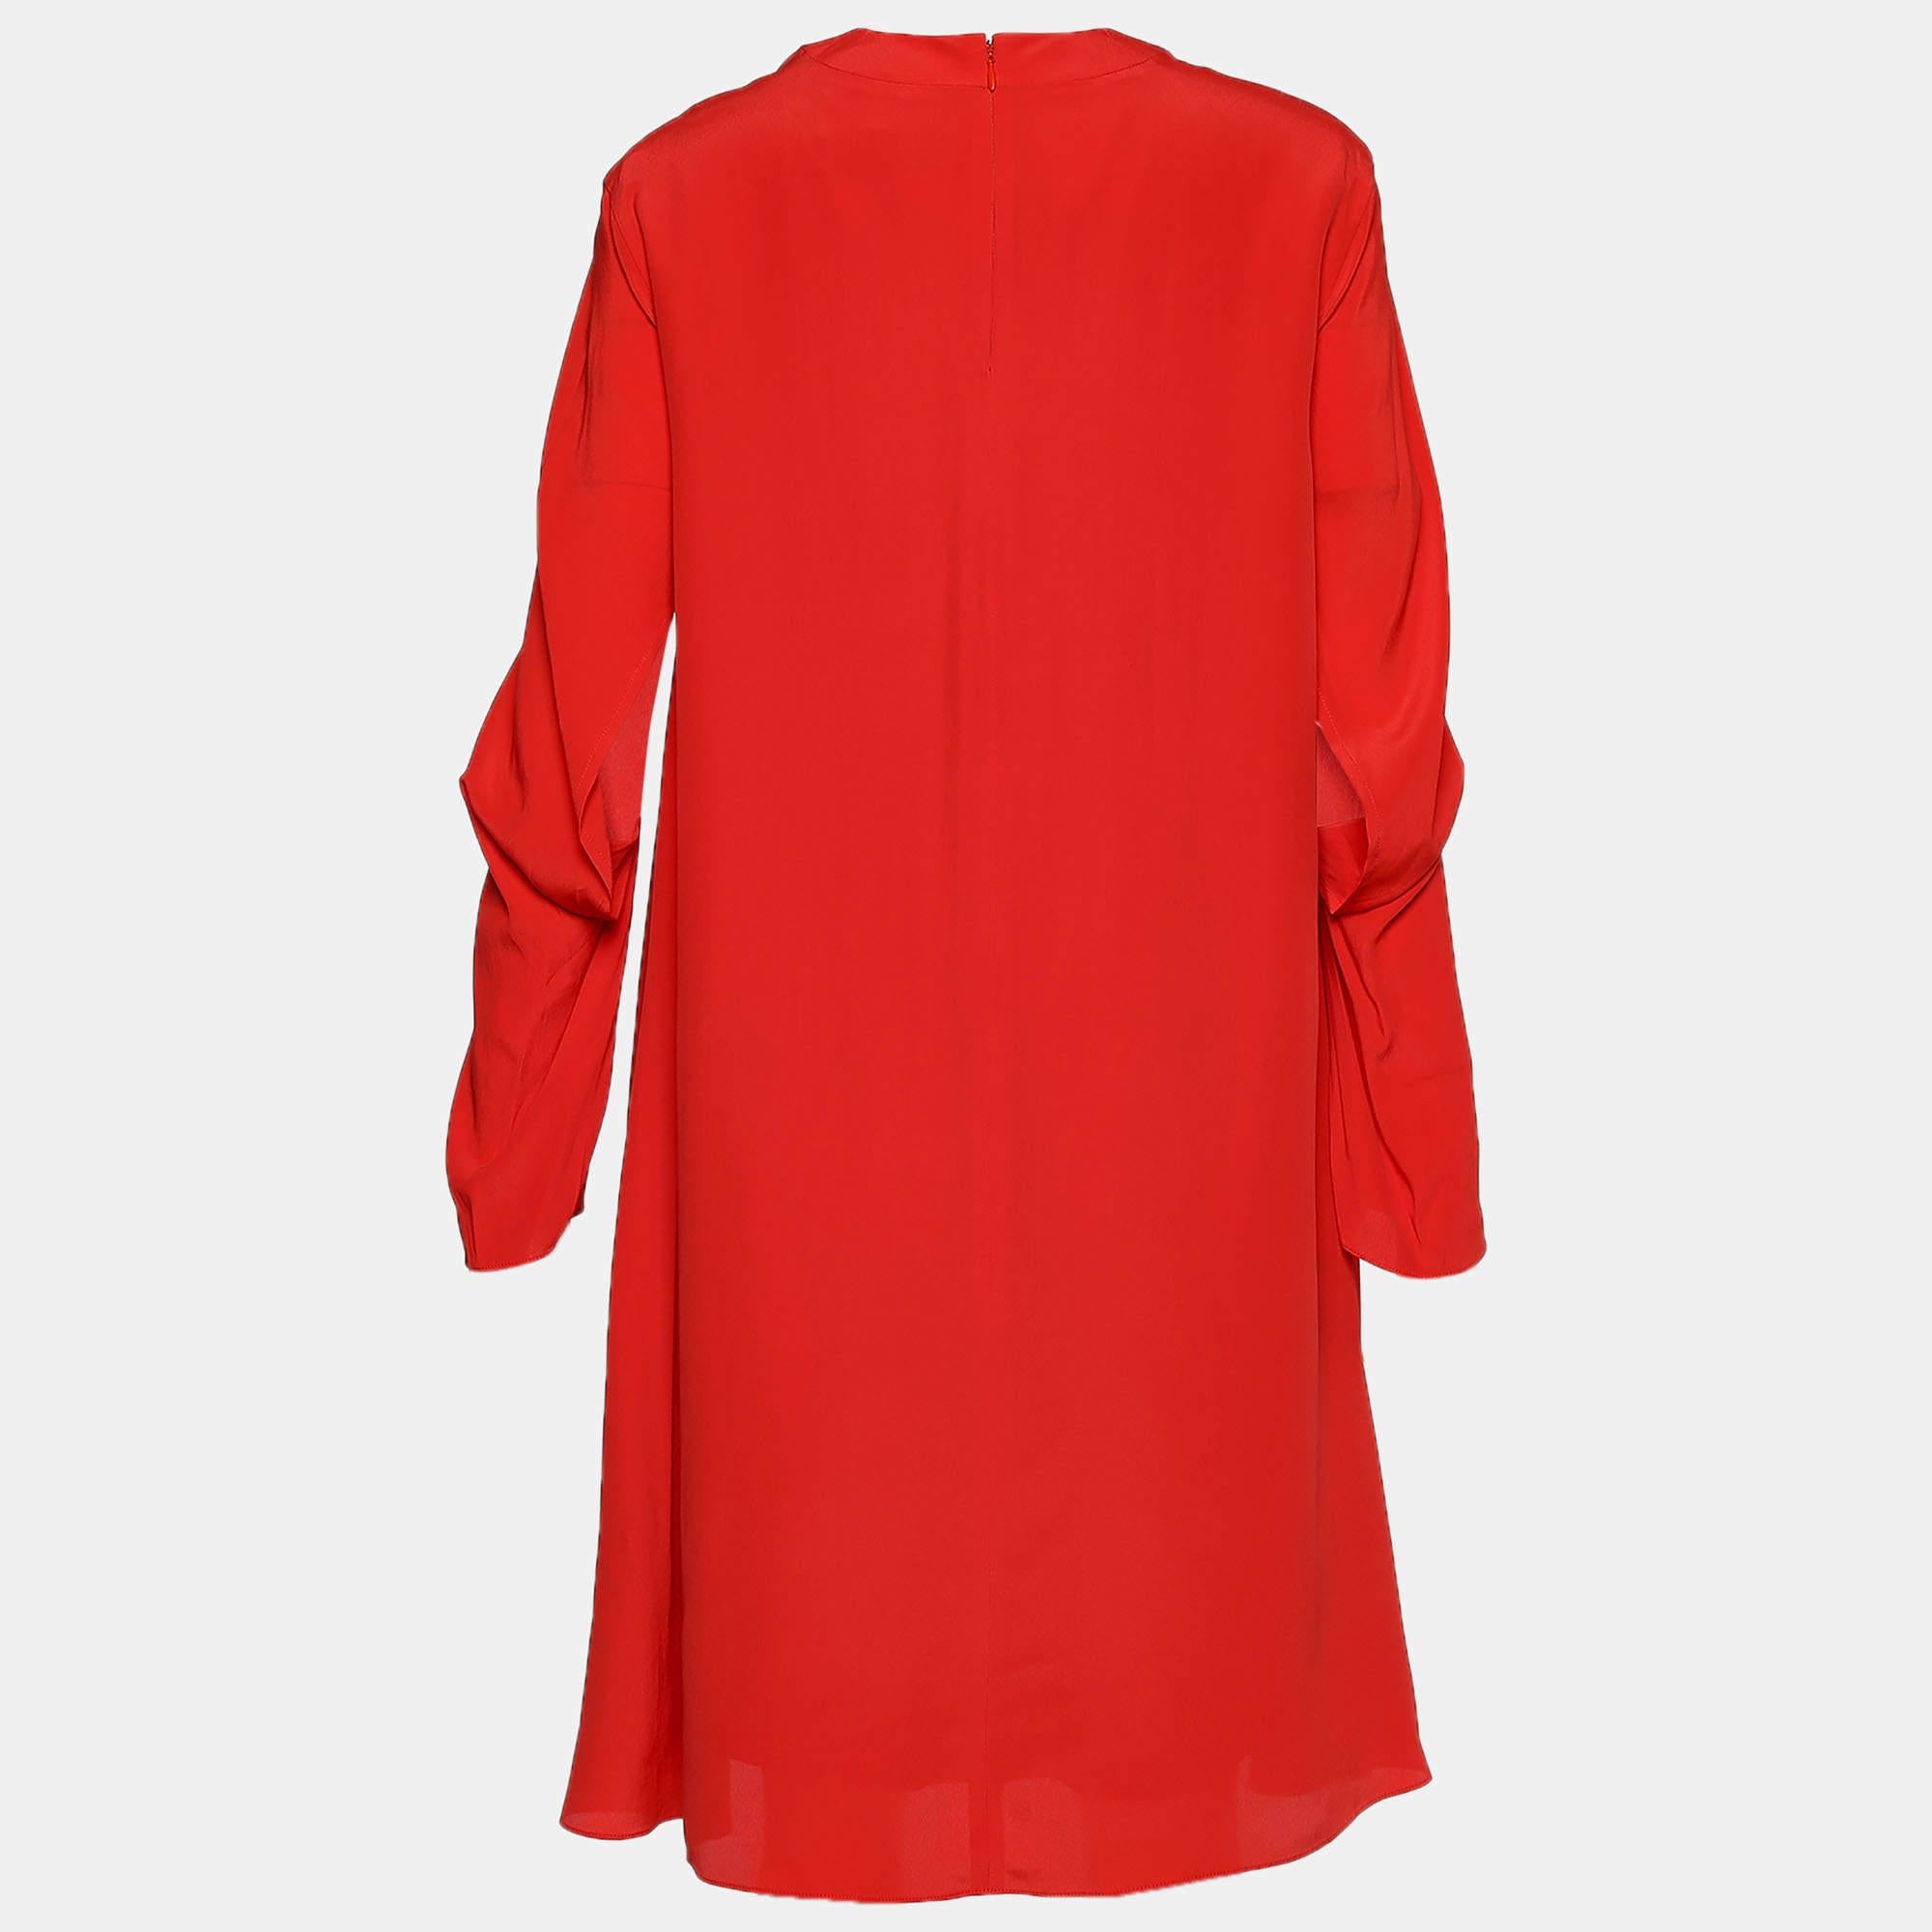 Attractive and classy, this shift dress from the House of Balenciaga will definitely elevate your style factor and make you look chic! It is created using orange crepe fabric into an oversized silhouette. It has long sleeves and a zipper for